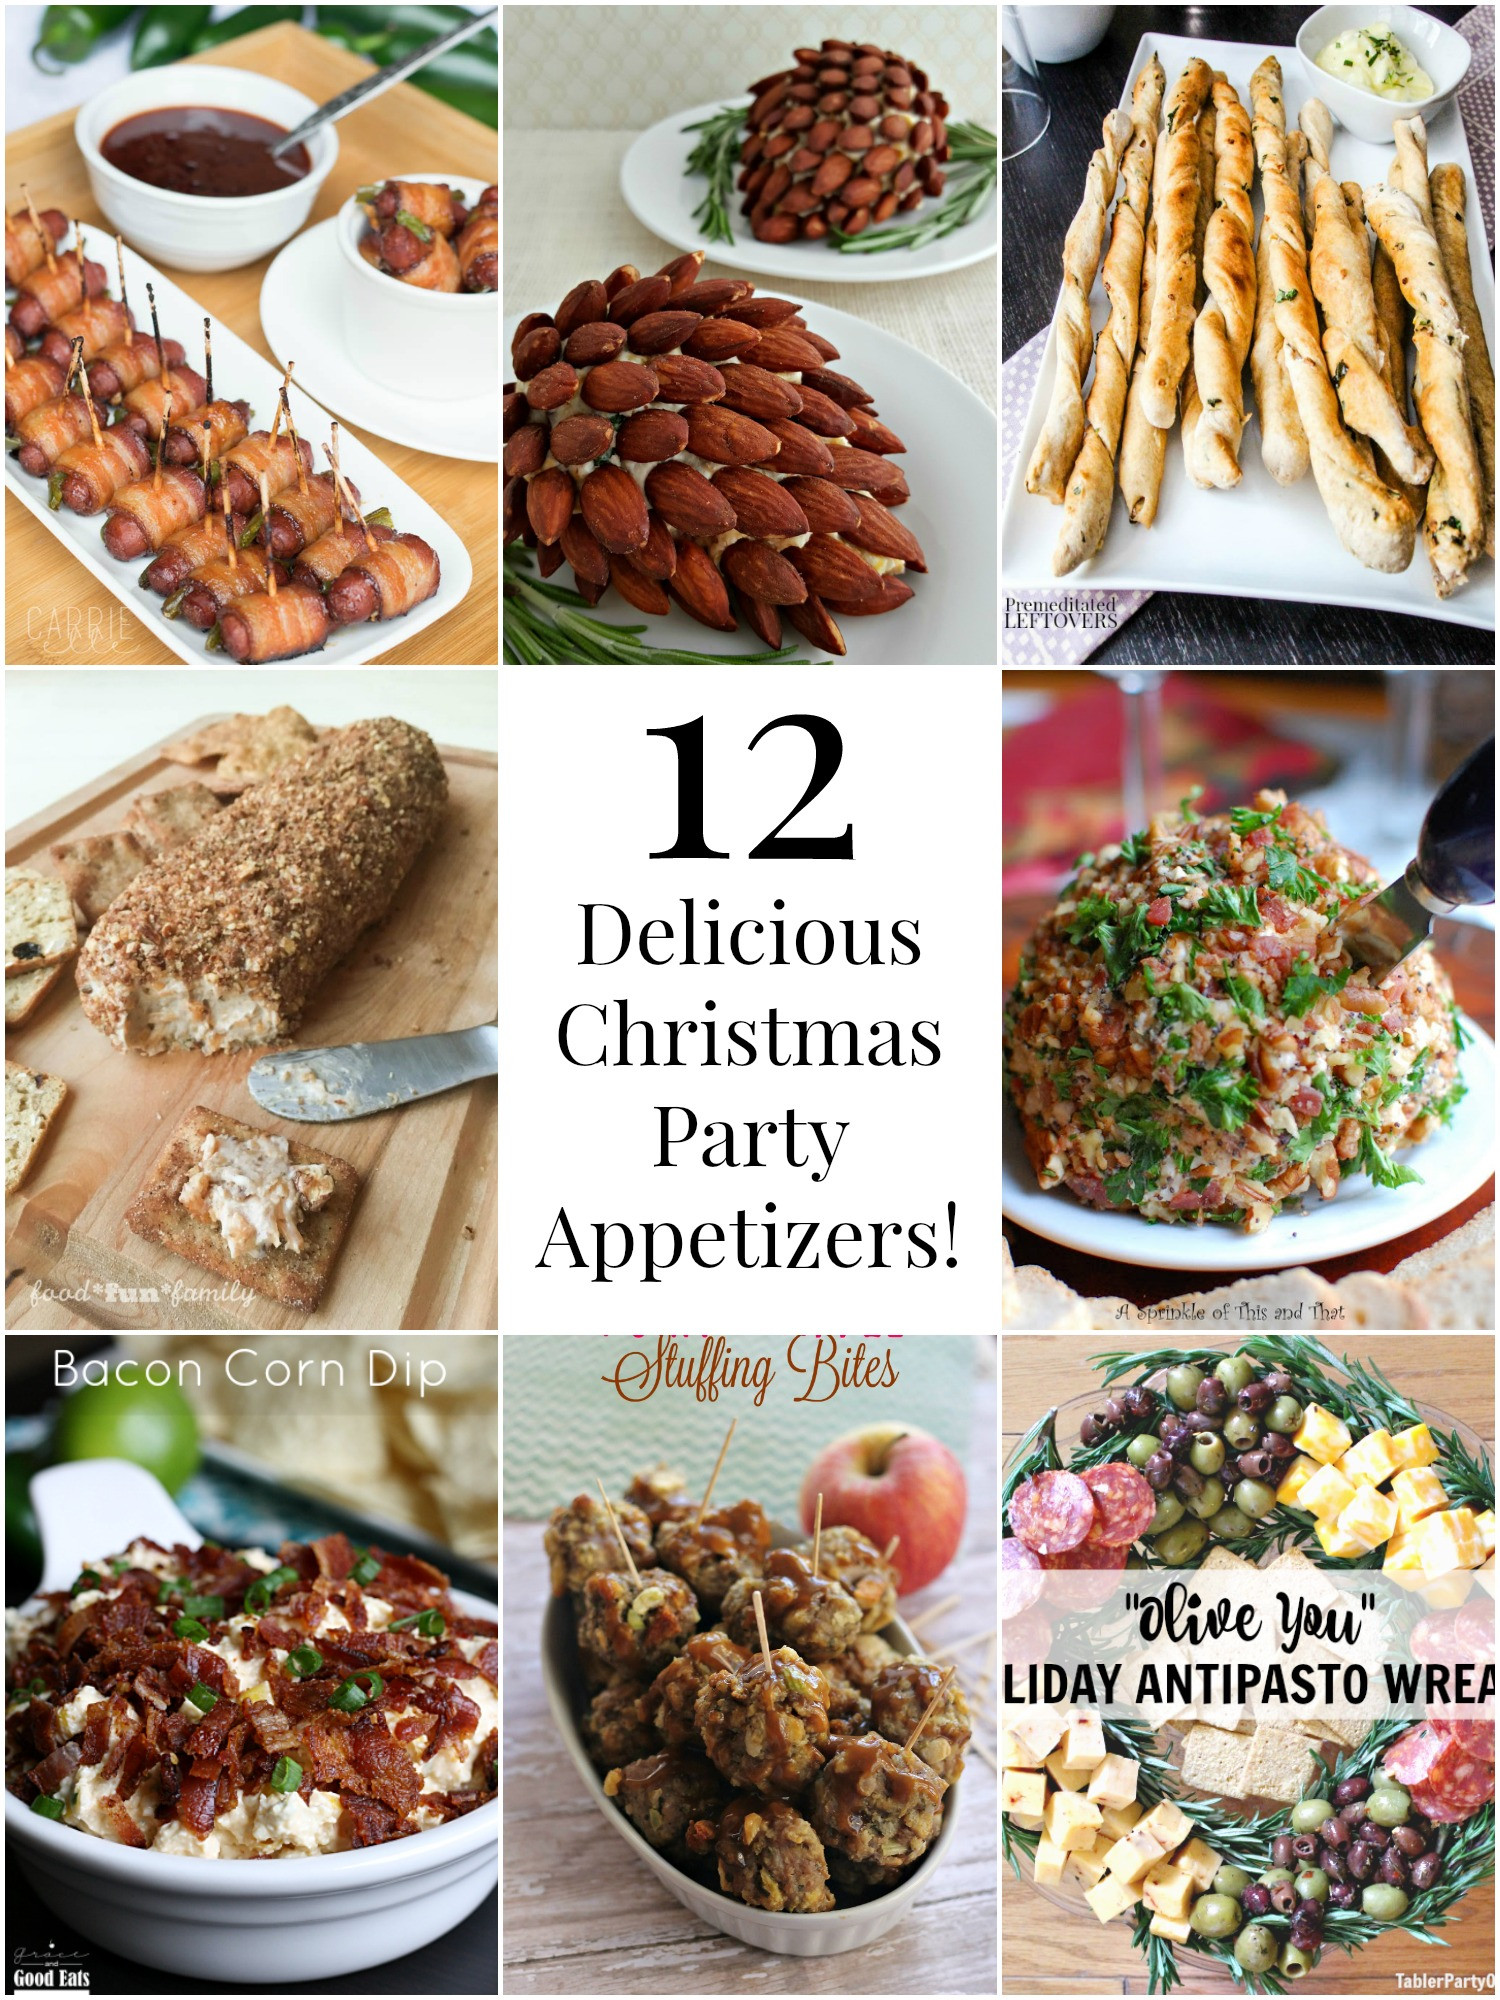 Horderves Ideas For Christmas Party
 So Creative 12 Delicious Christmas Party Appetizers